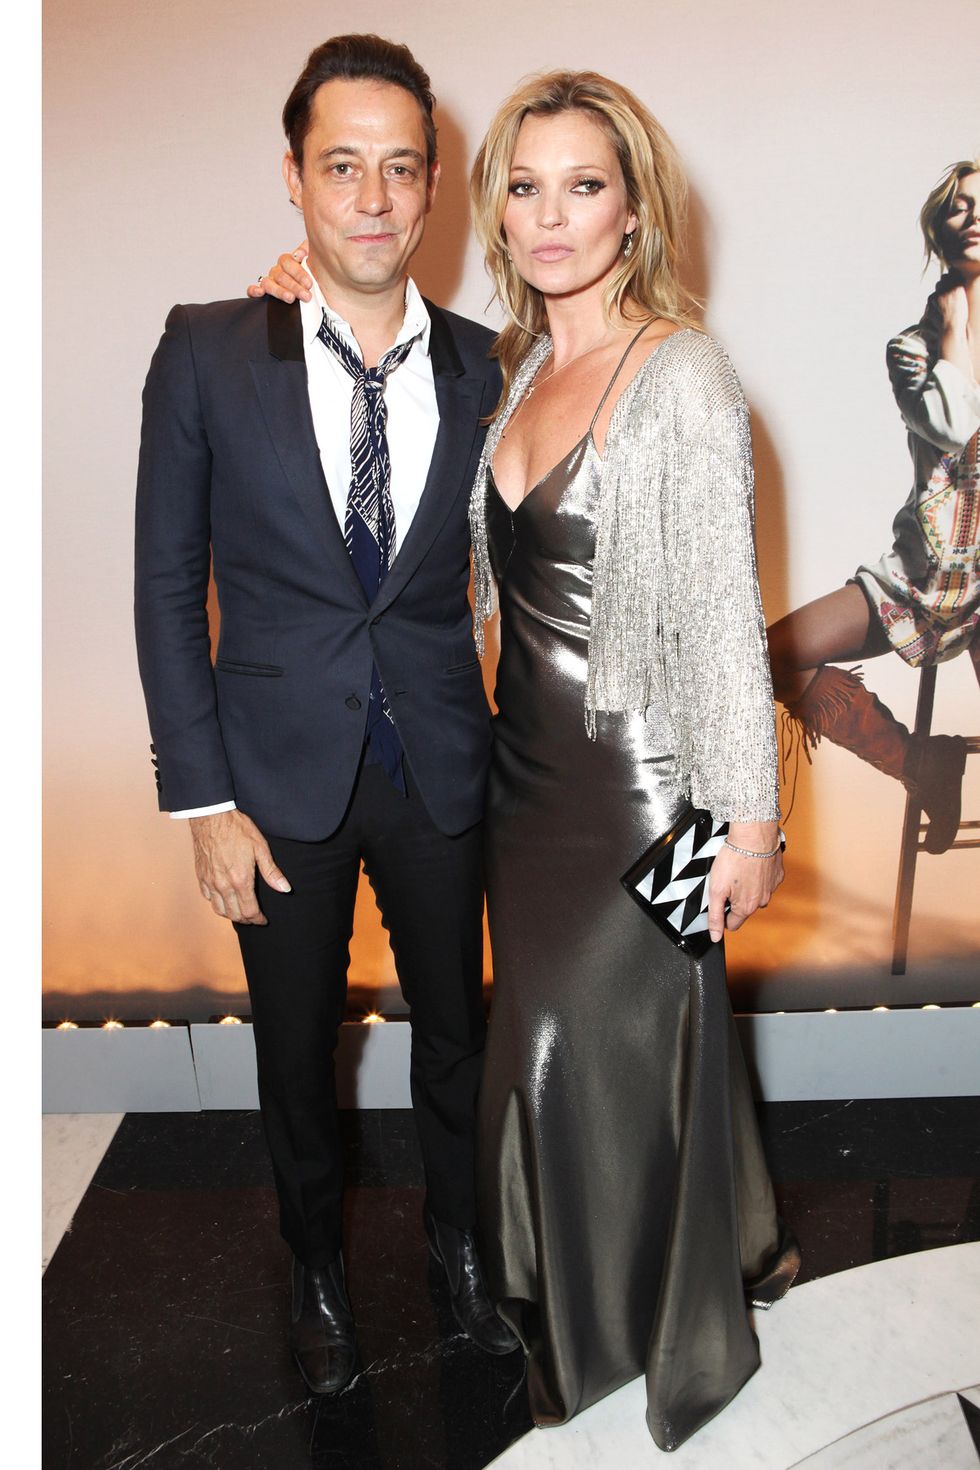 LONDON, ENGLAND - APRIL 29:  Jamie Hince (L) and Kate Moss attend a private dinner celebrating the Global Launch of the 'Kate Moss for TopShop Collection' at The Connaught Hotel on April 29, 2014 in London, England.  (Photo by David M. Benett/Getty Images)